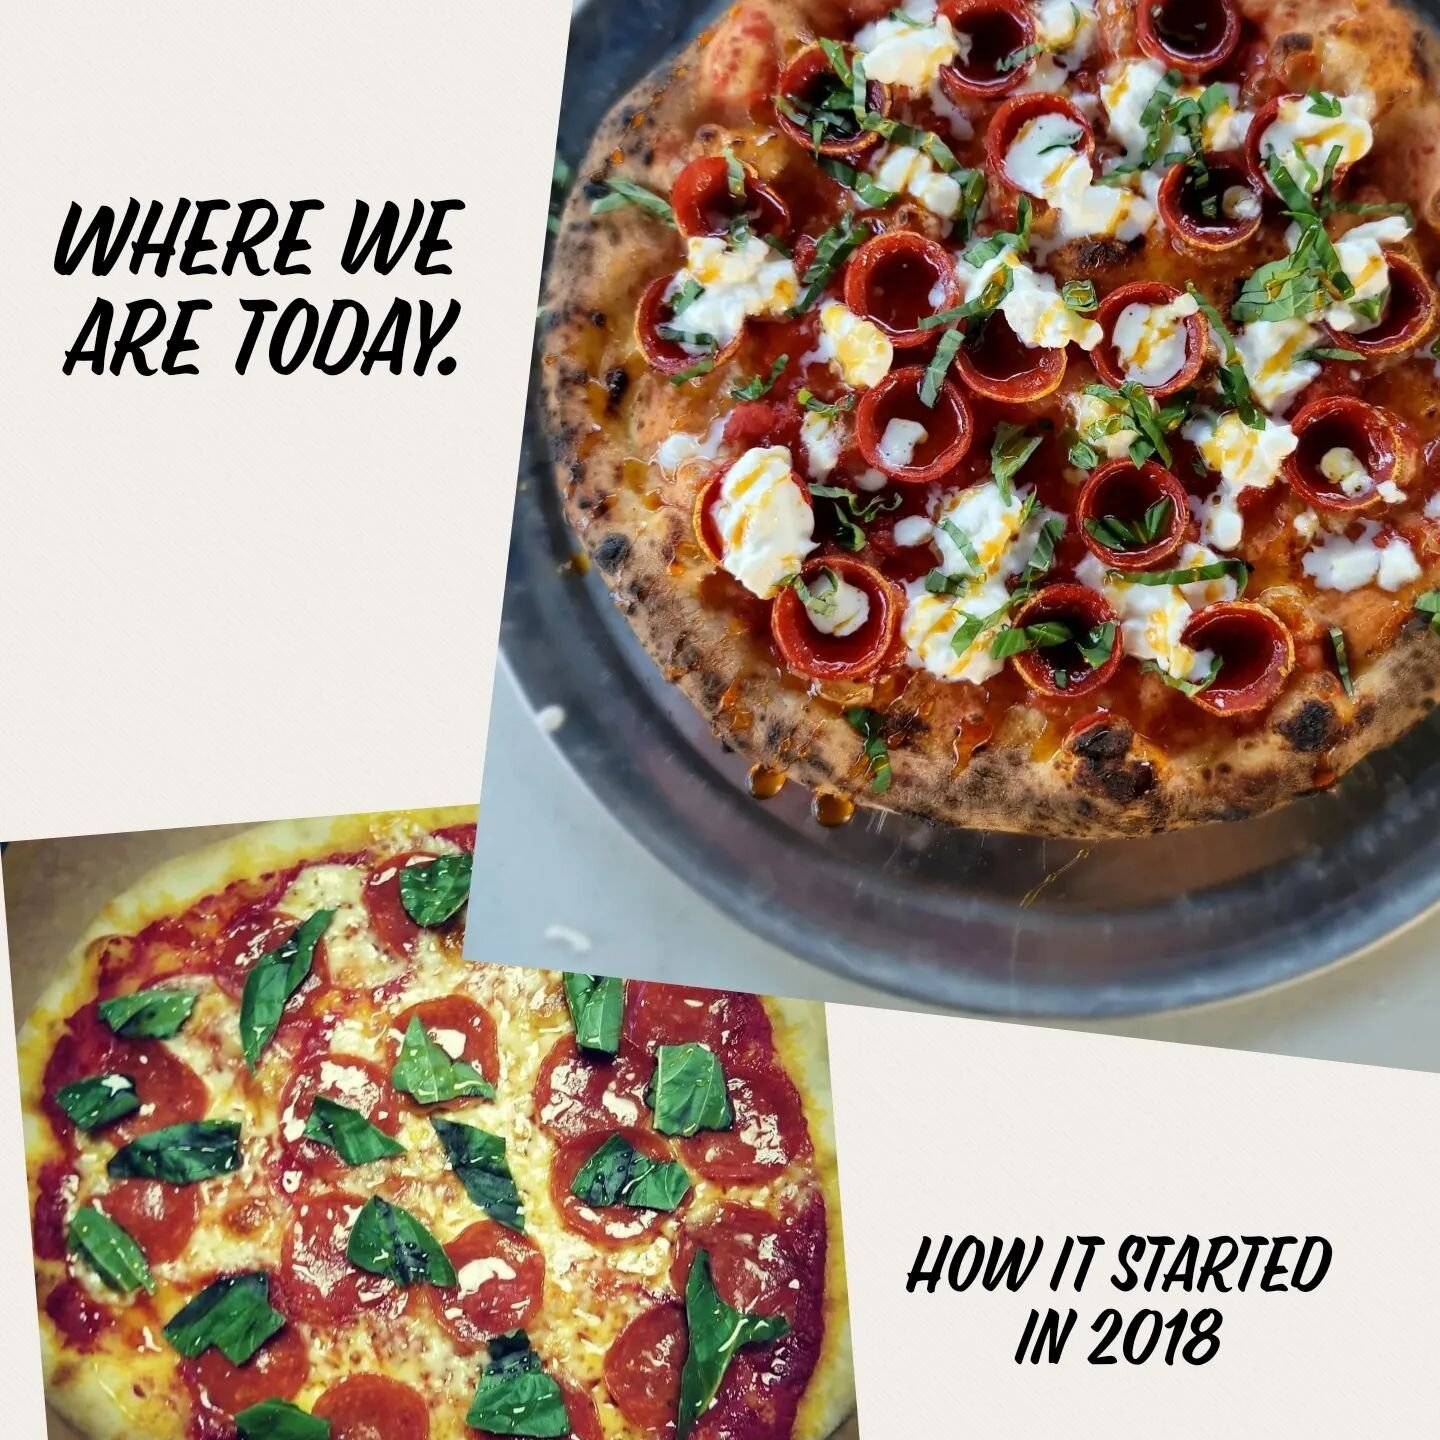 Where we are today vs how we started. In 2018 I was making mediocre pizzas in my home gas oven and had enough. They tasted fine, but they were aesthetically not sexy and not my favorite style. I decided to purchase my 1st wood burning pizza oven  for